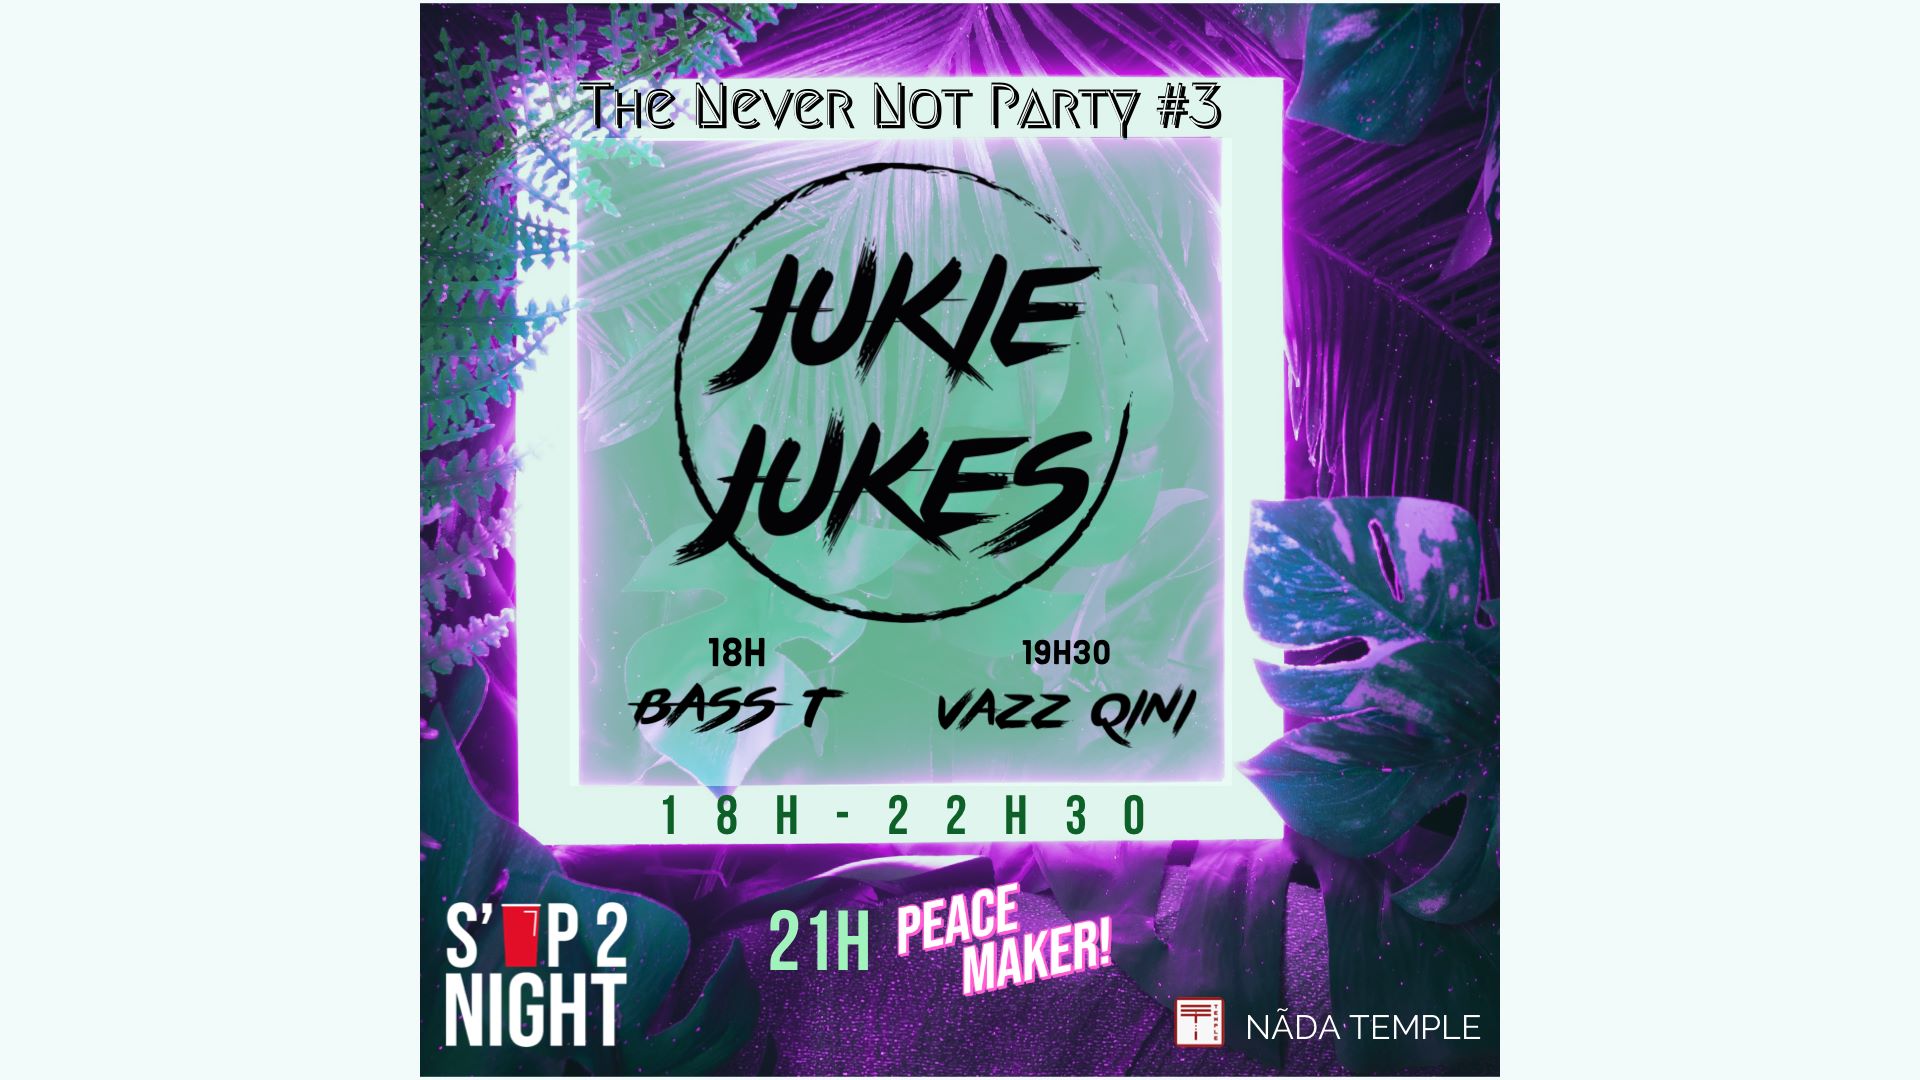 THE NEVER NOT PARTY #3